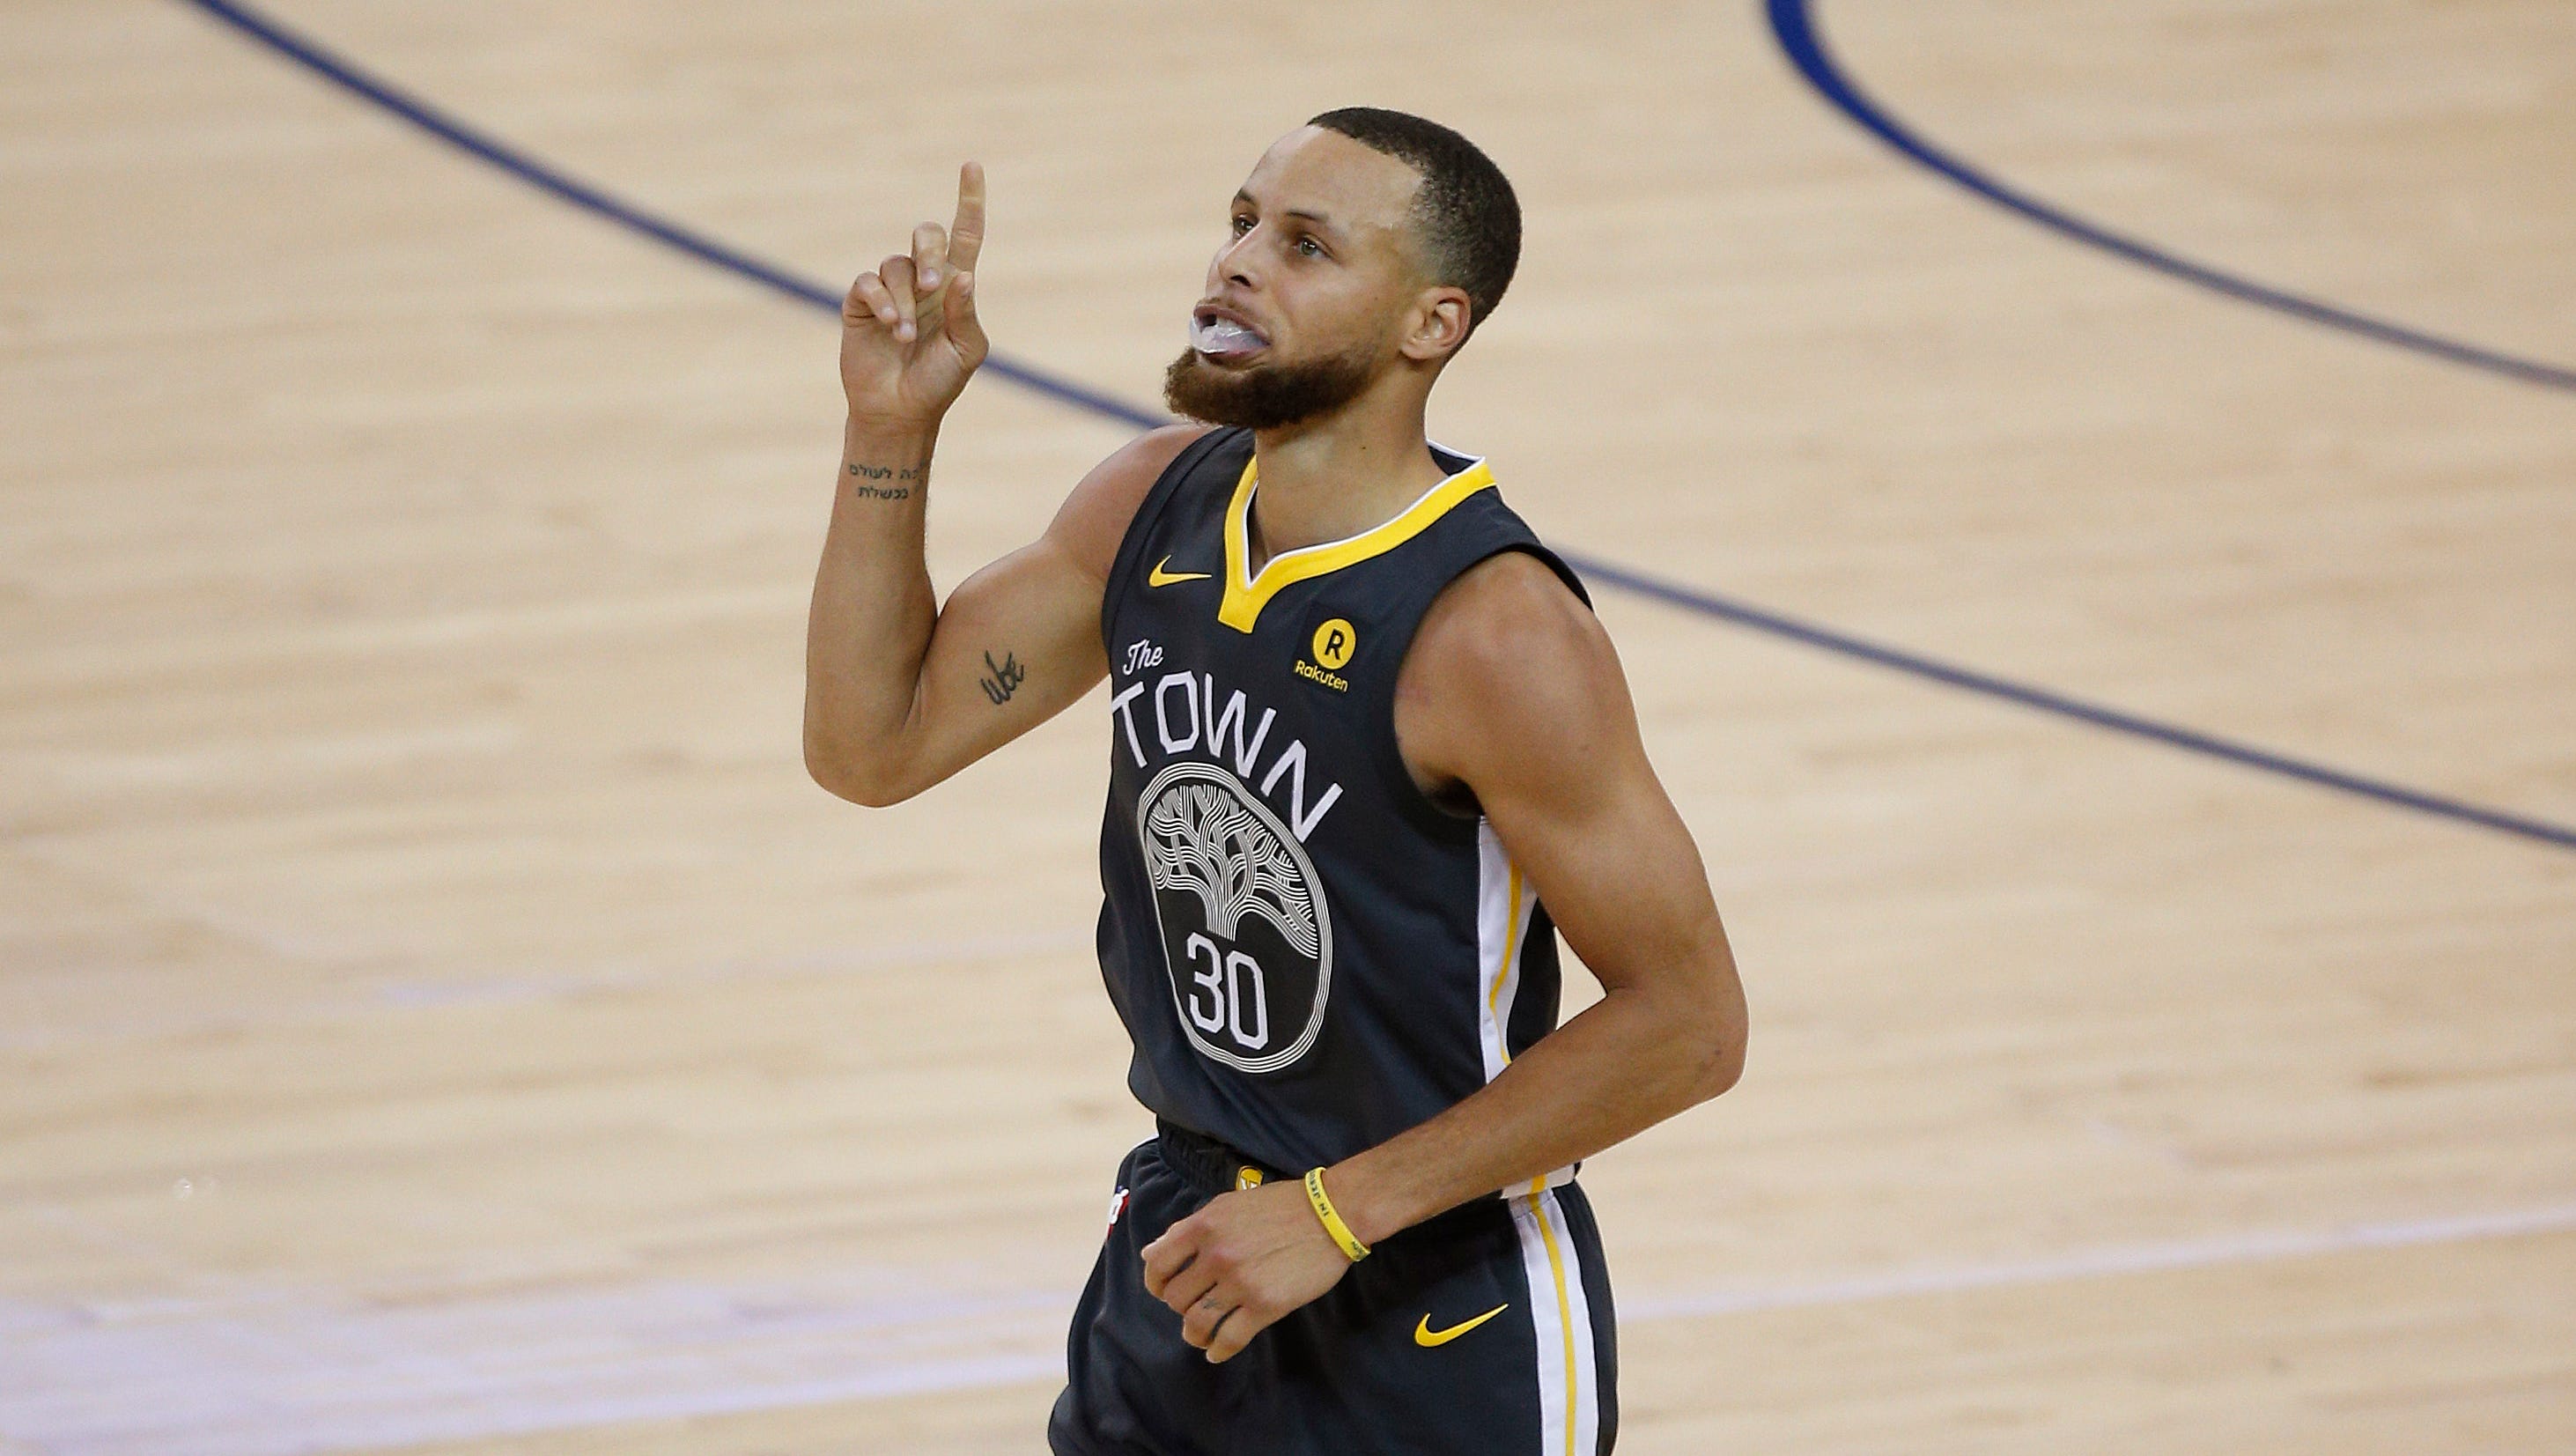 Steph Curry sets Finals threepoint record as Warriors take 20 lead